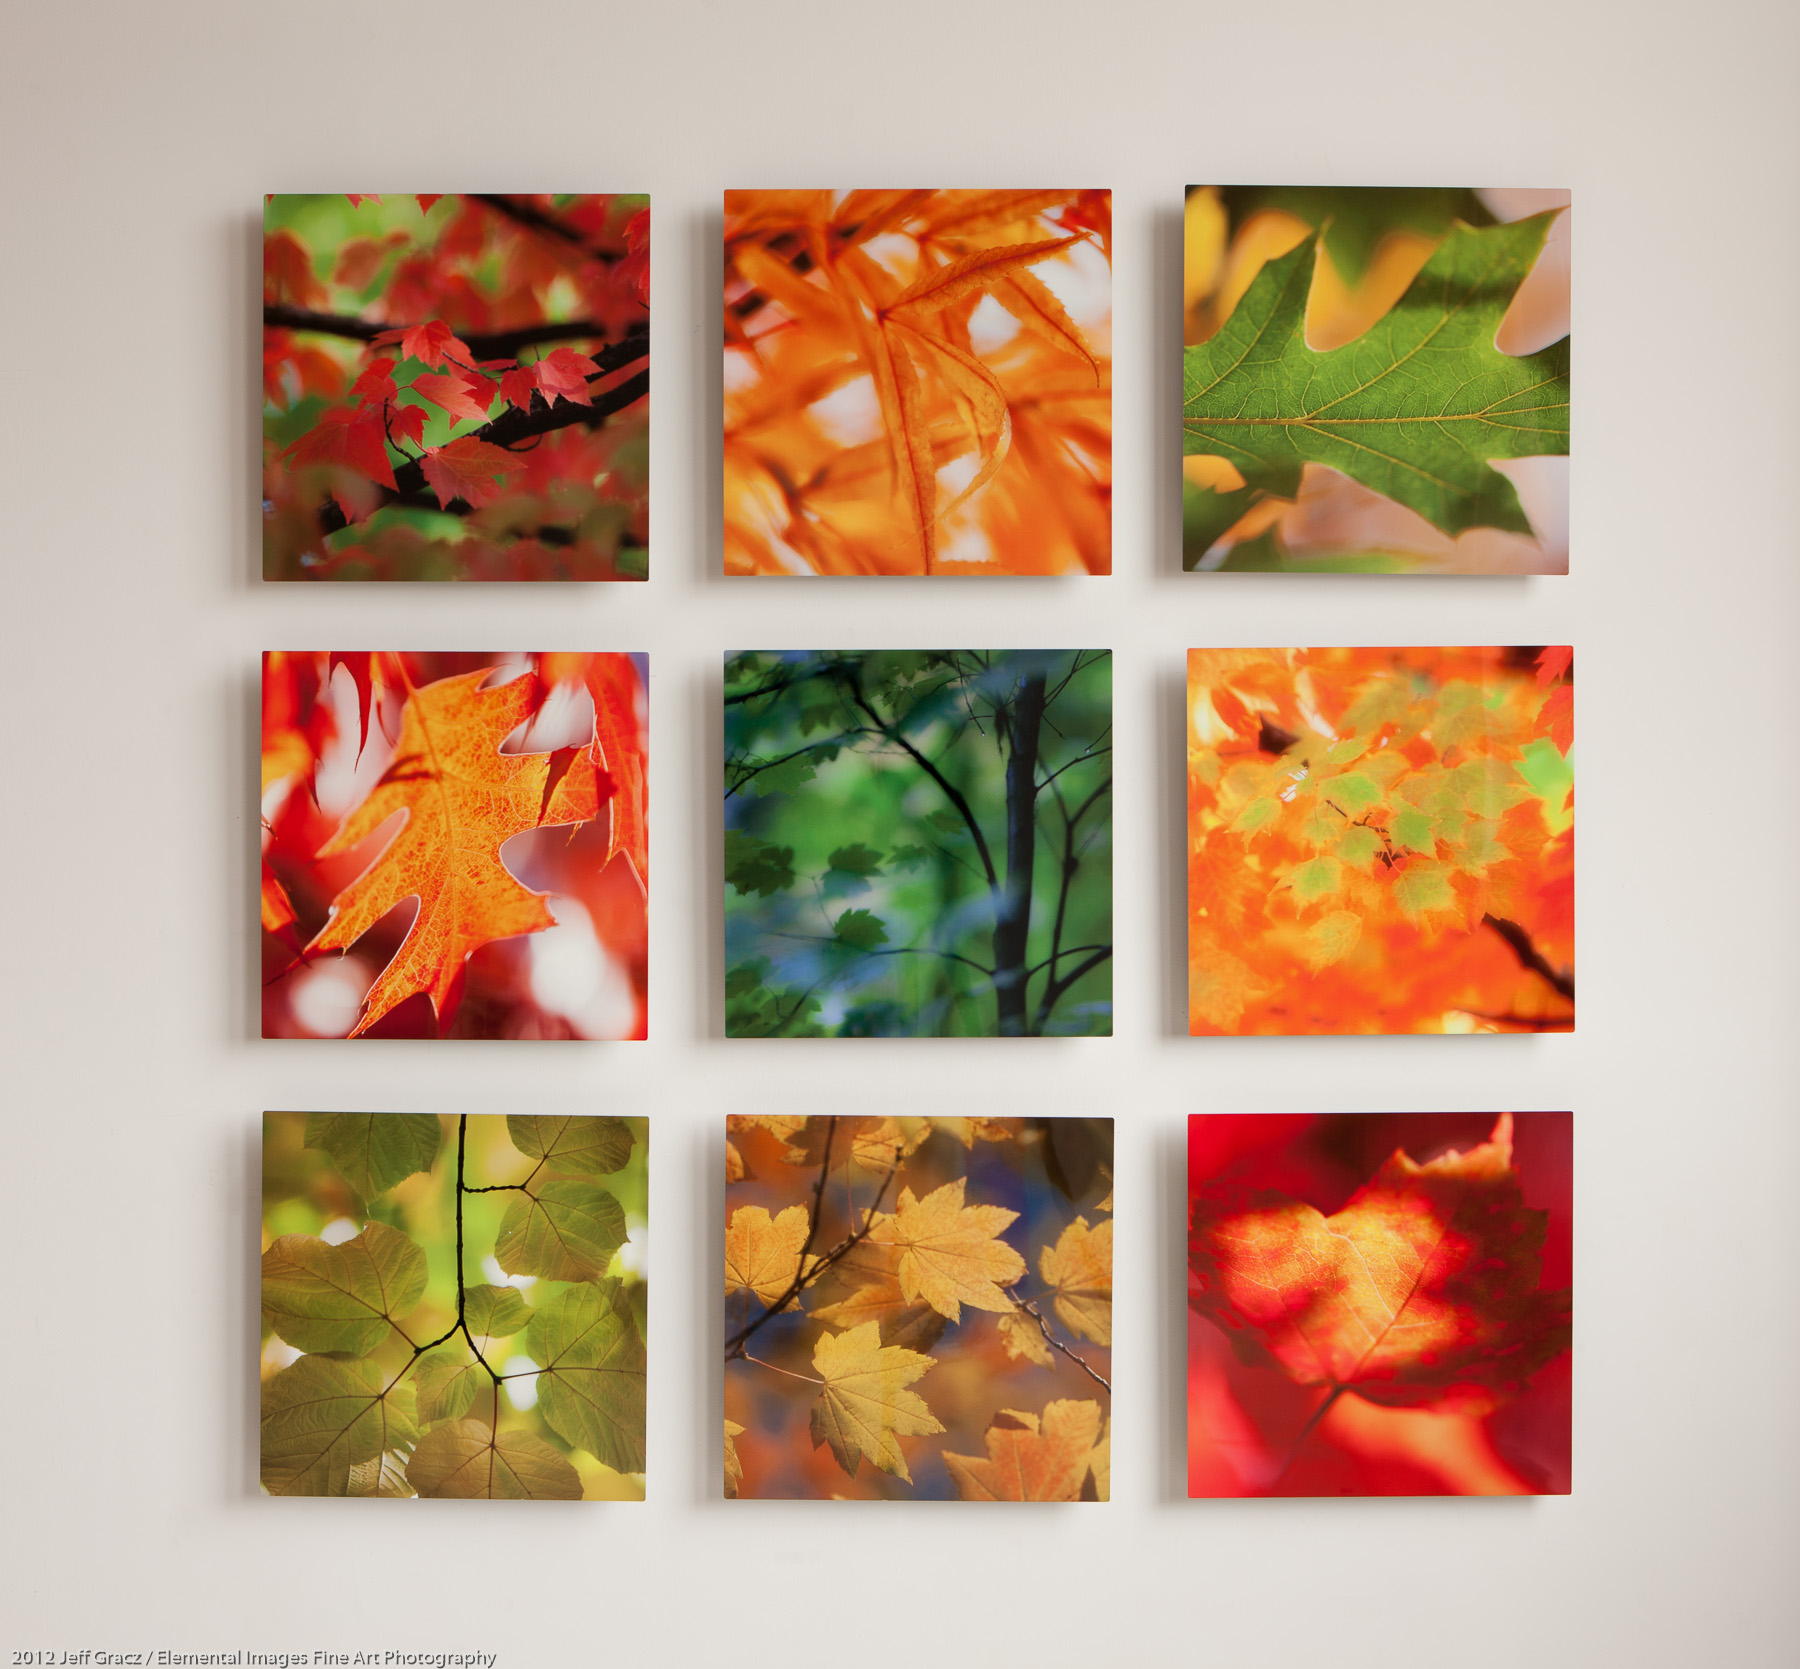 16x16 grouping example | Portland | OR | USA - © 2012 Jeff Gracz / Elemental Images Fine Art Photography - All Rights Reserved Worldwide